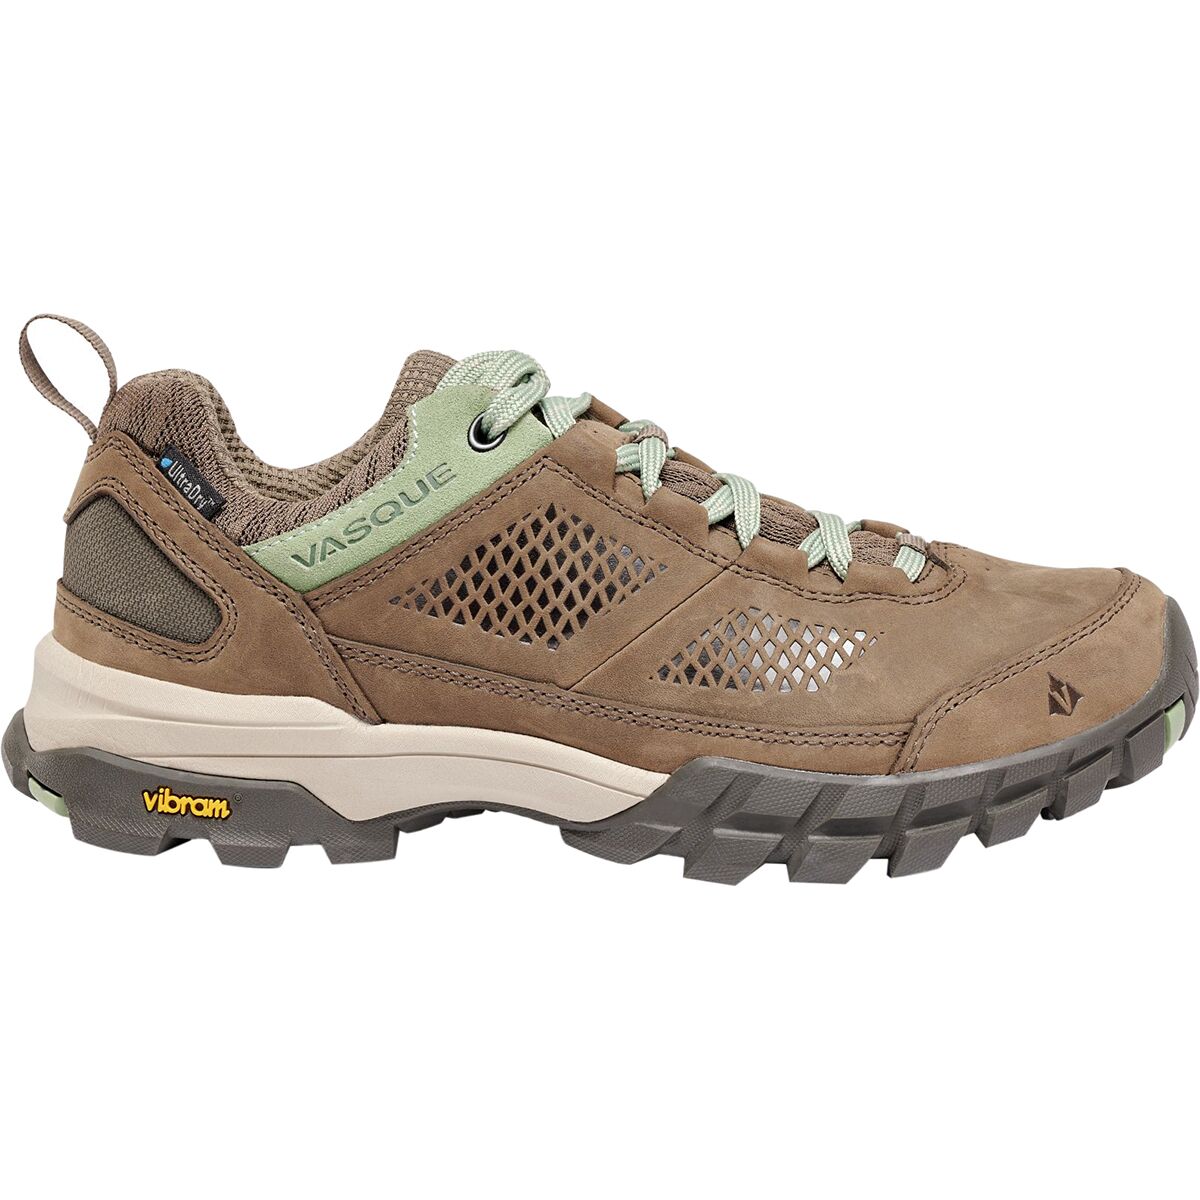 Photos - Trekking Shoes Vasque Talus AT Low UltraDry Wide Hiking Shoe - Women's 